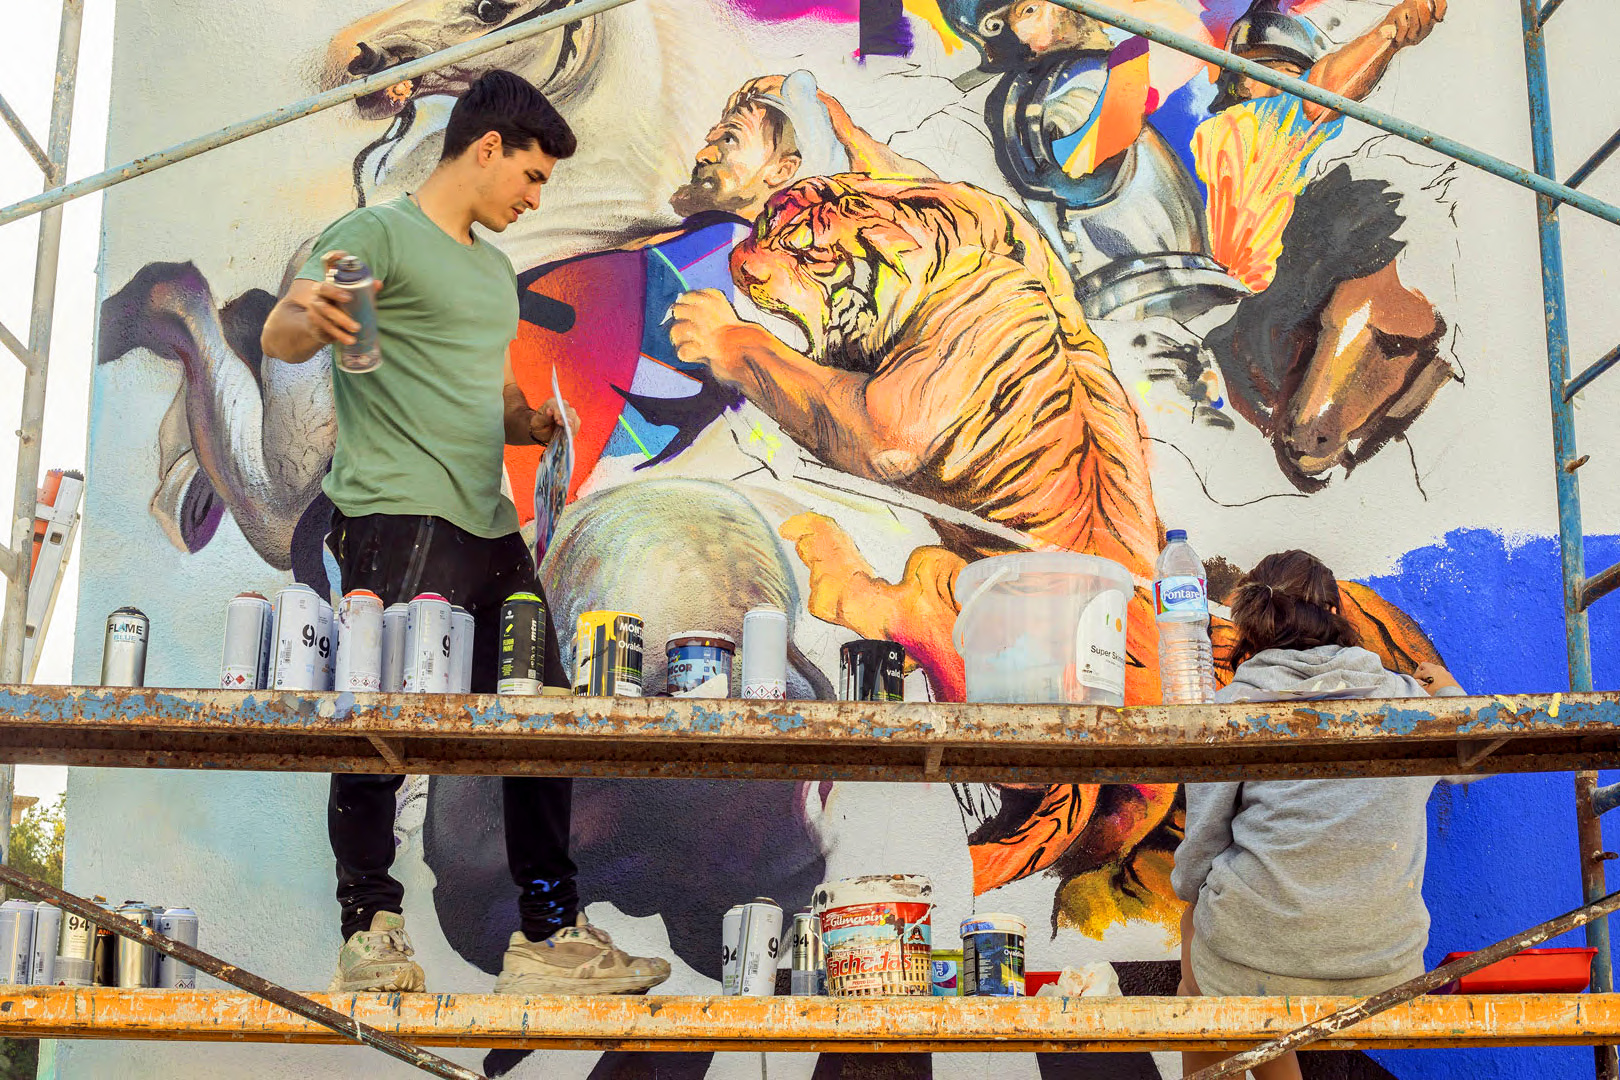 Murfin holding a spray can working on a mural painting, with a tiger roaring at the center